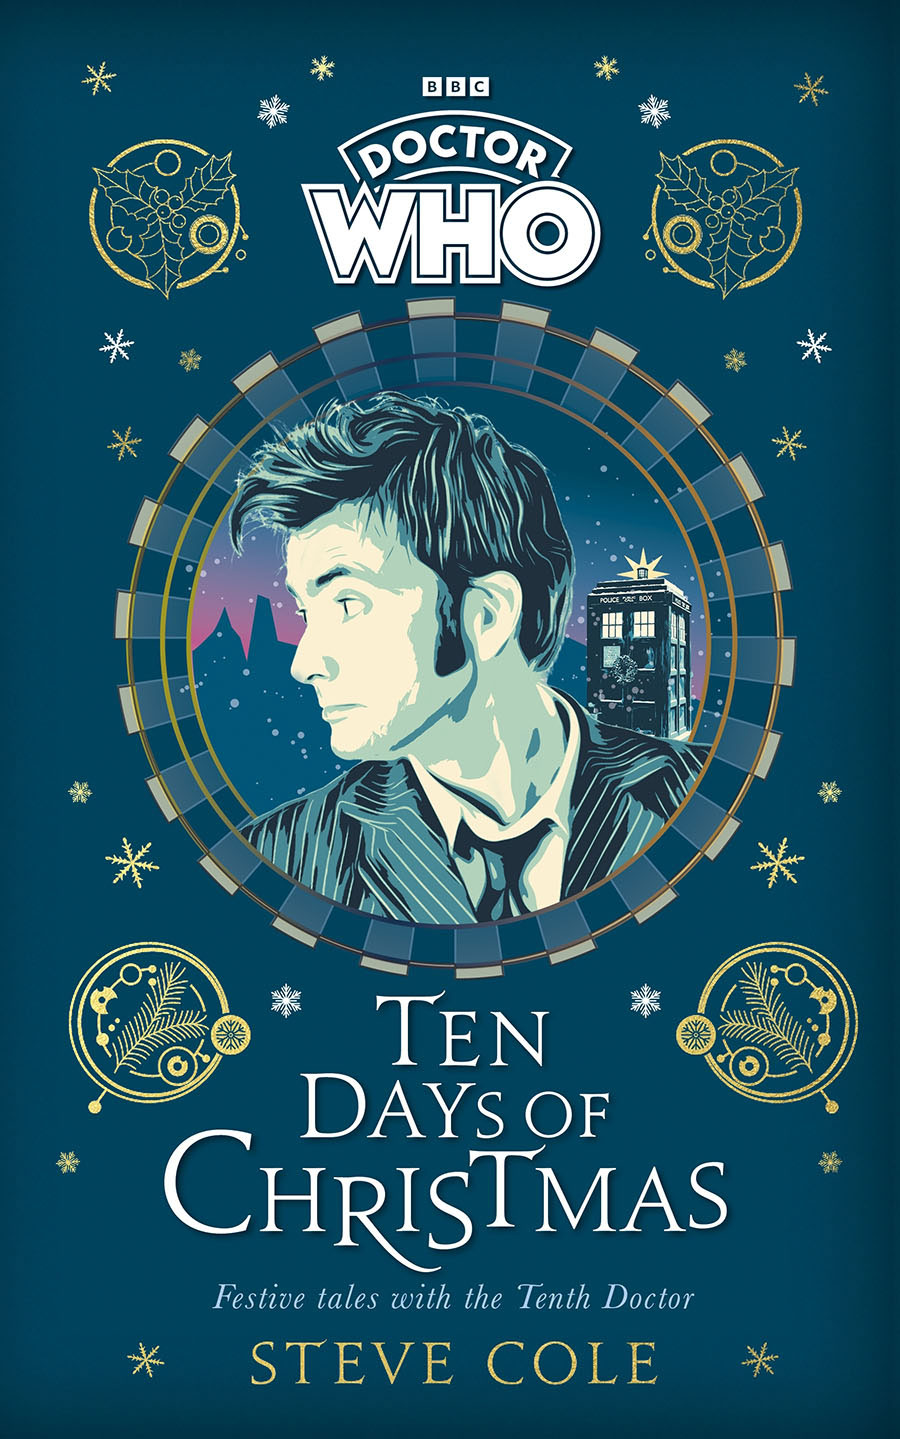 Doctor Who Ten Days Of Christmas Festive Tales With The Tenth Doctor HC